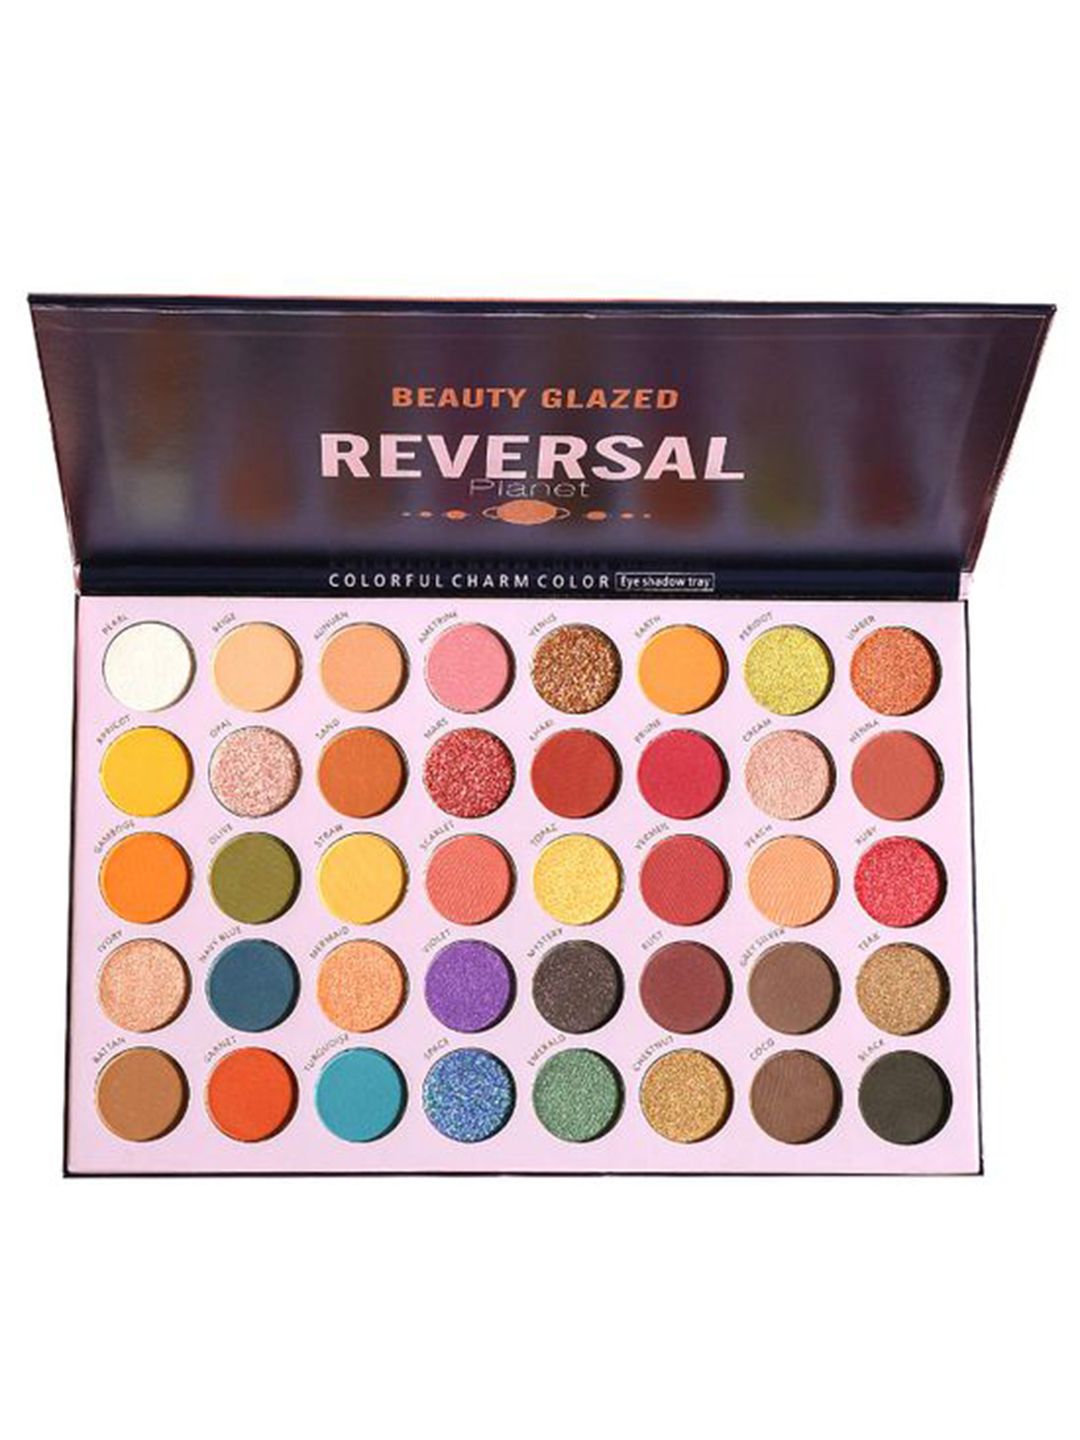 BEAUTY GLAZED Colorful Charm Color 40 Color Eyeshadow Palette - Reversal Planet Price in India